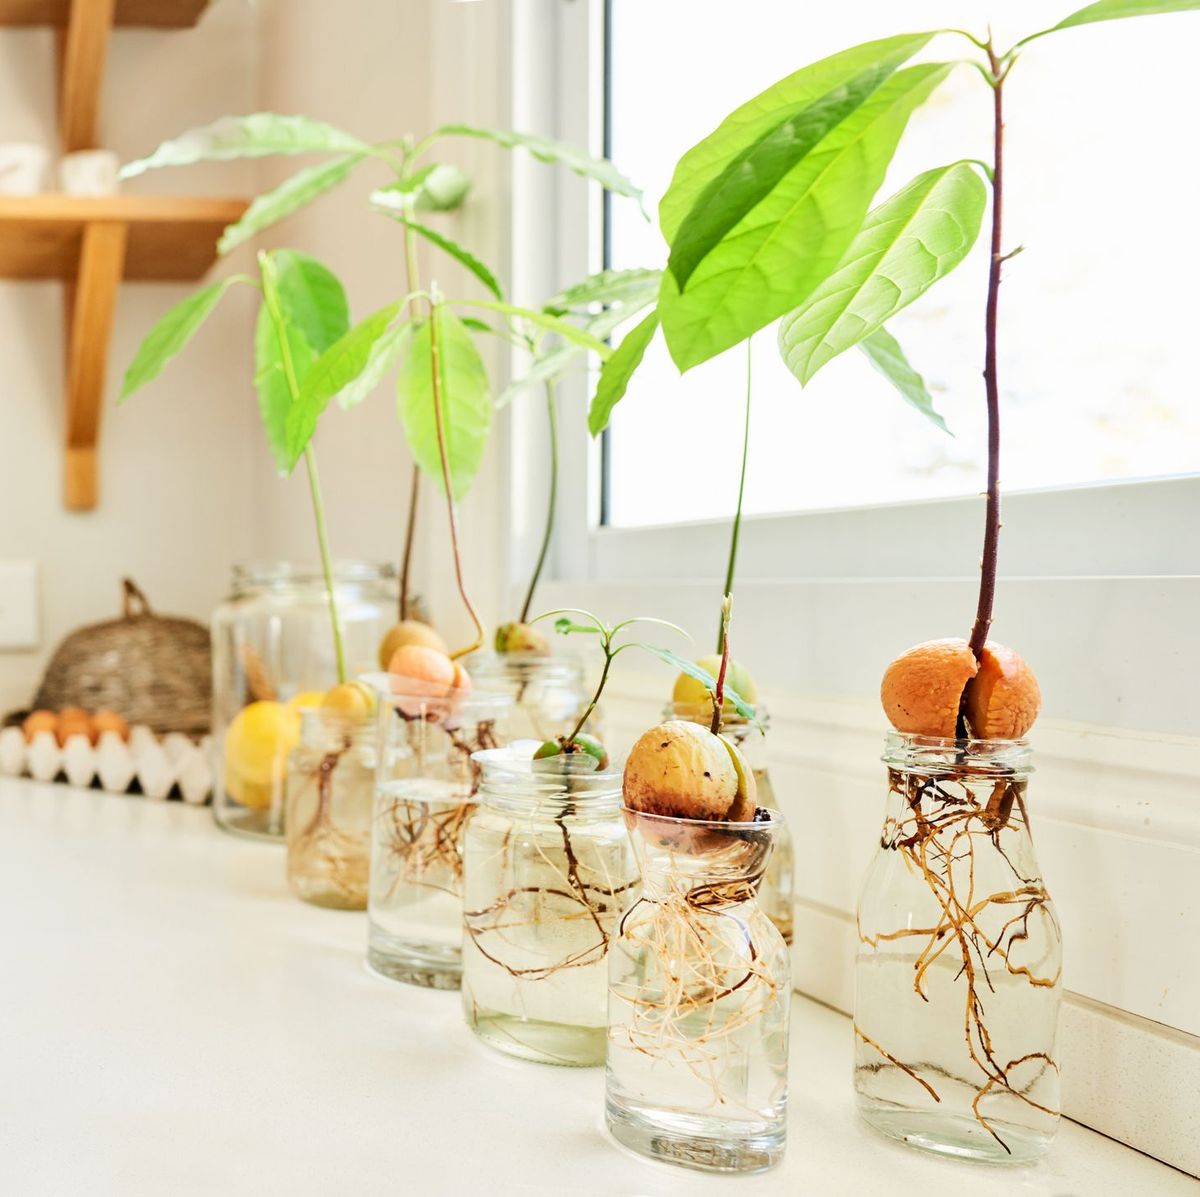 How To Grow An Avocado Tree From The Pit - Grow Avocado From Seed